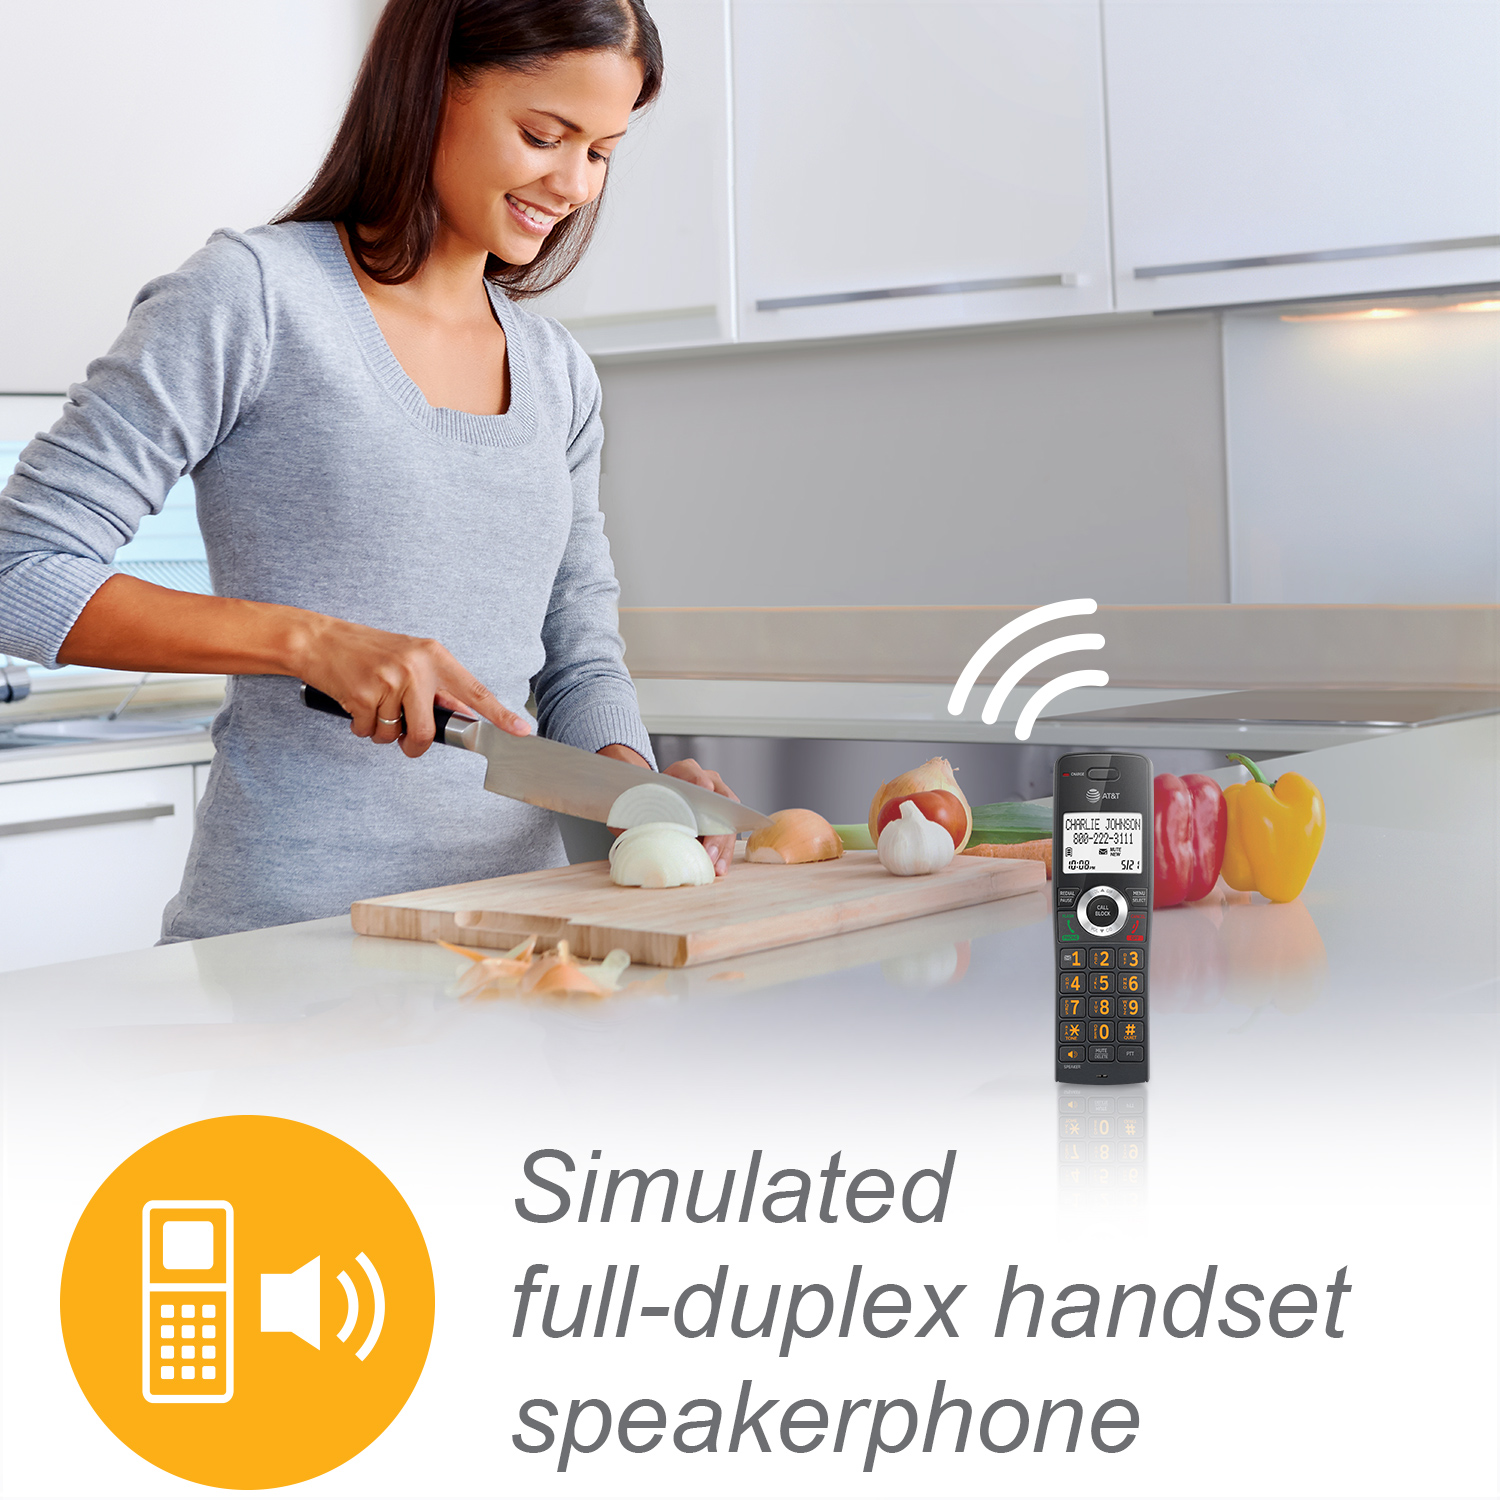 5-Handset Expandable Cordless Phone with Unsurpassed Range, Smart Call Blocker and Answering System - view 9